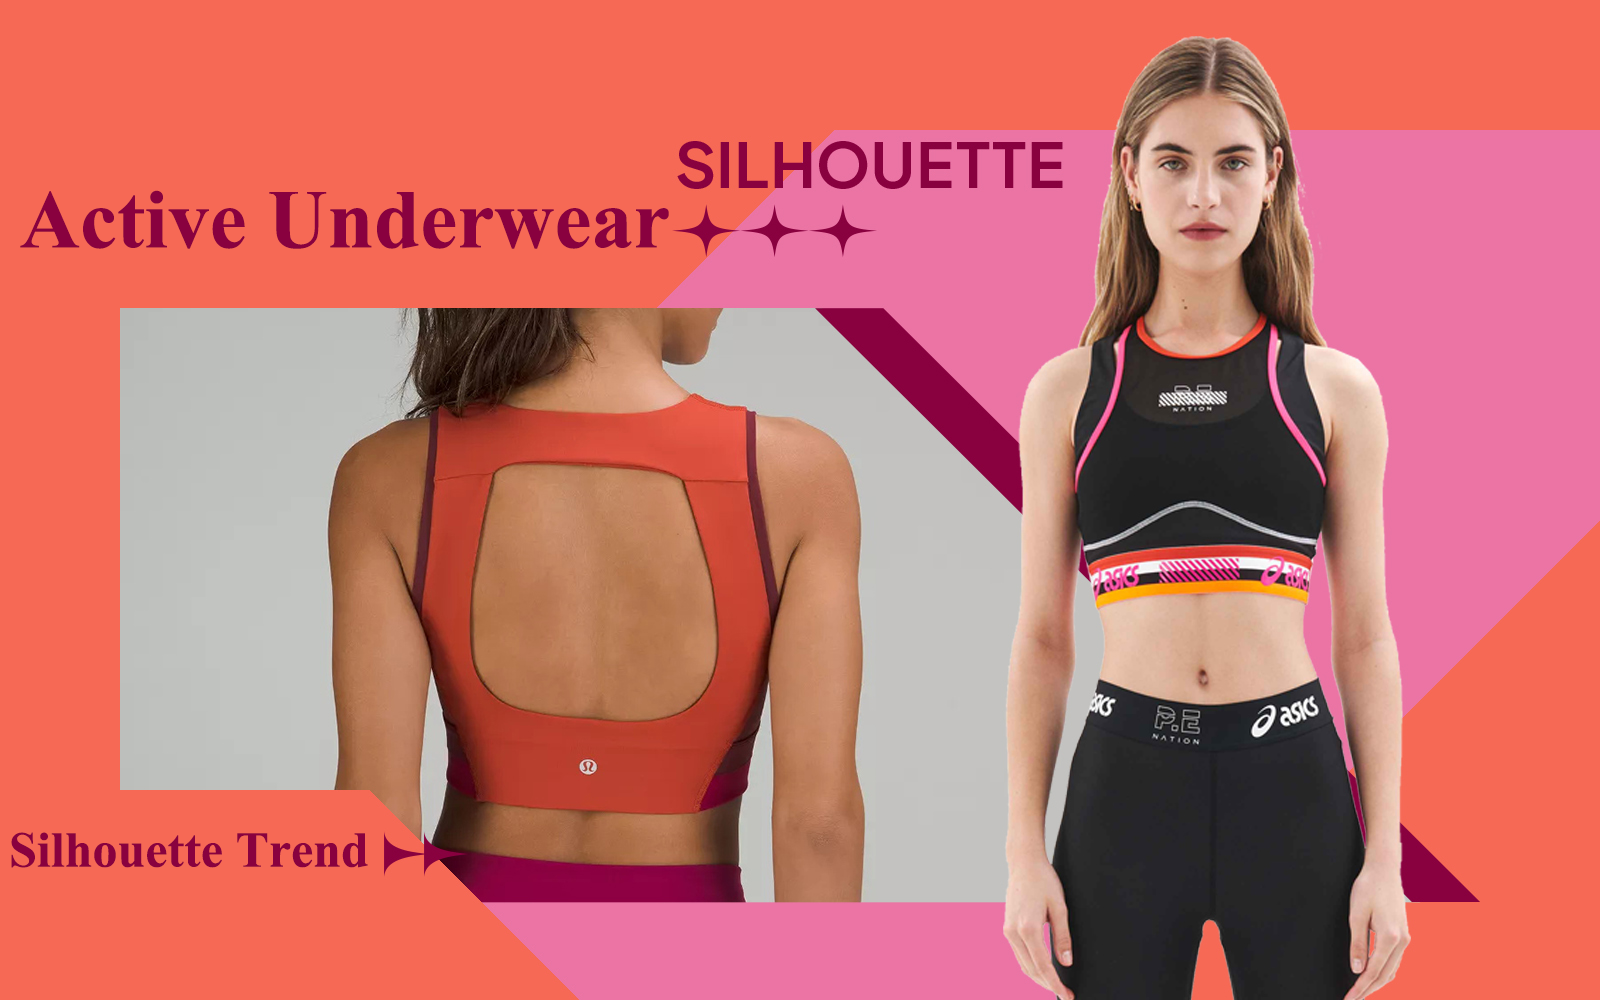 The Silhouette Trend for Active Underwear